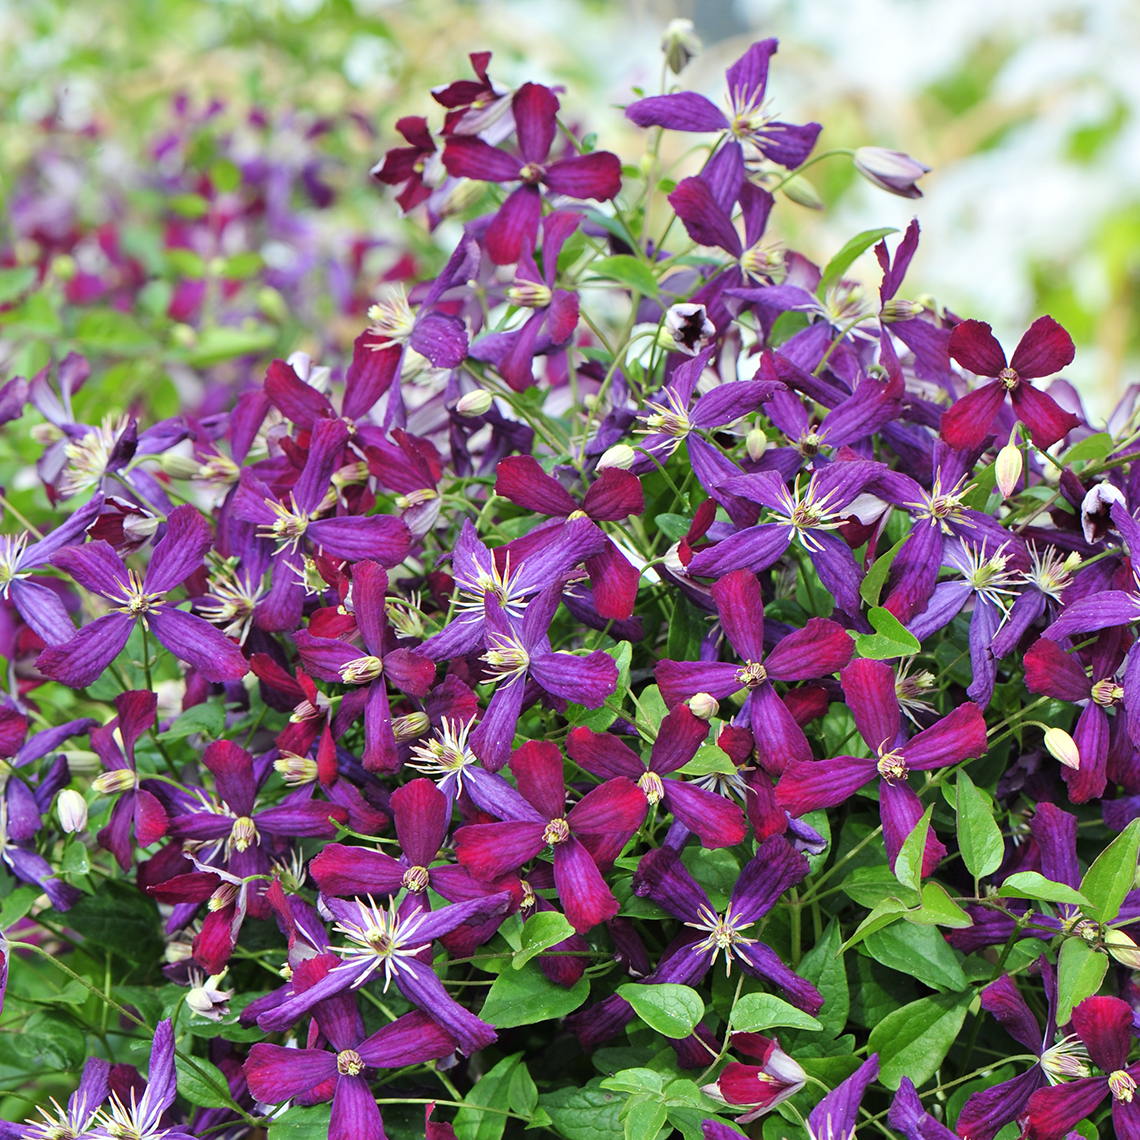 Clematis Sweet Summer Love blooms aging from berry to purple